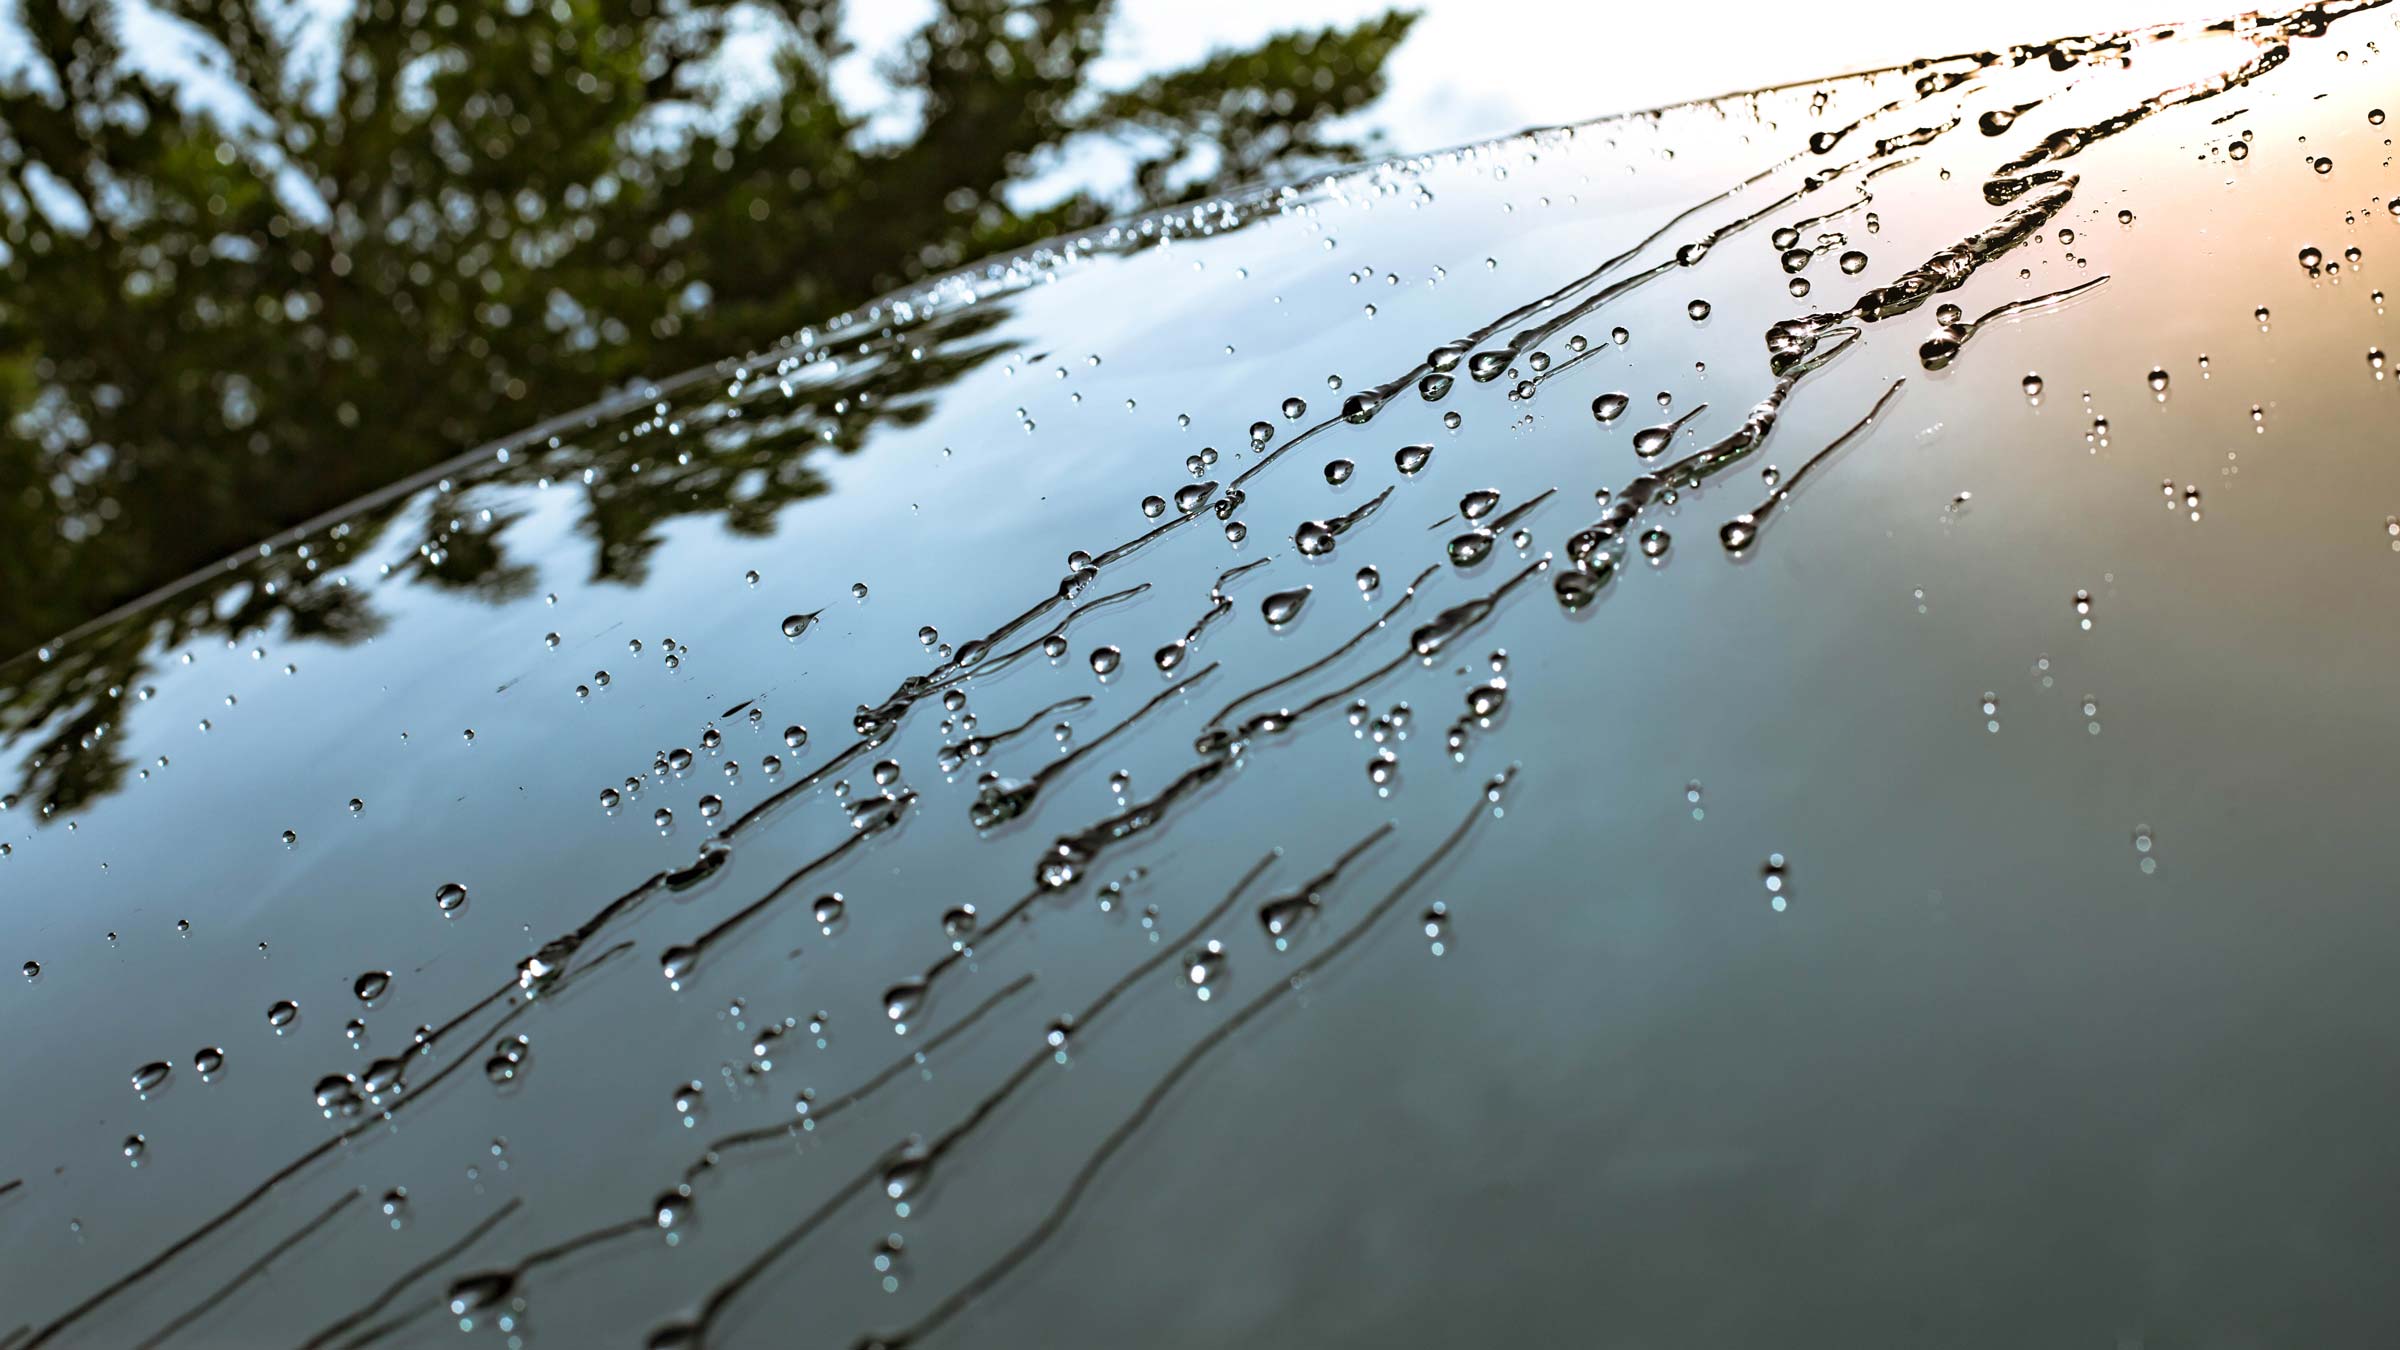 A windshield treated with windshield water repellent